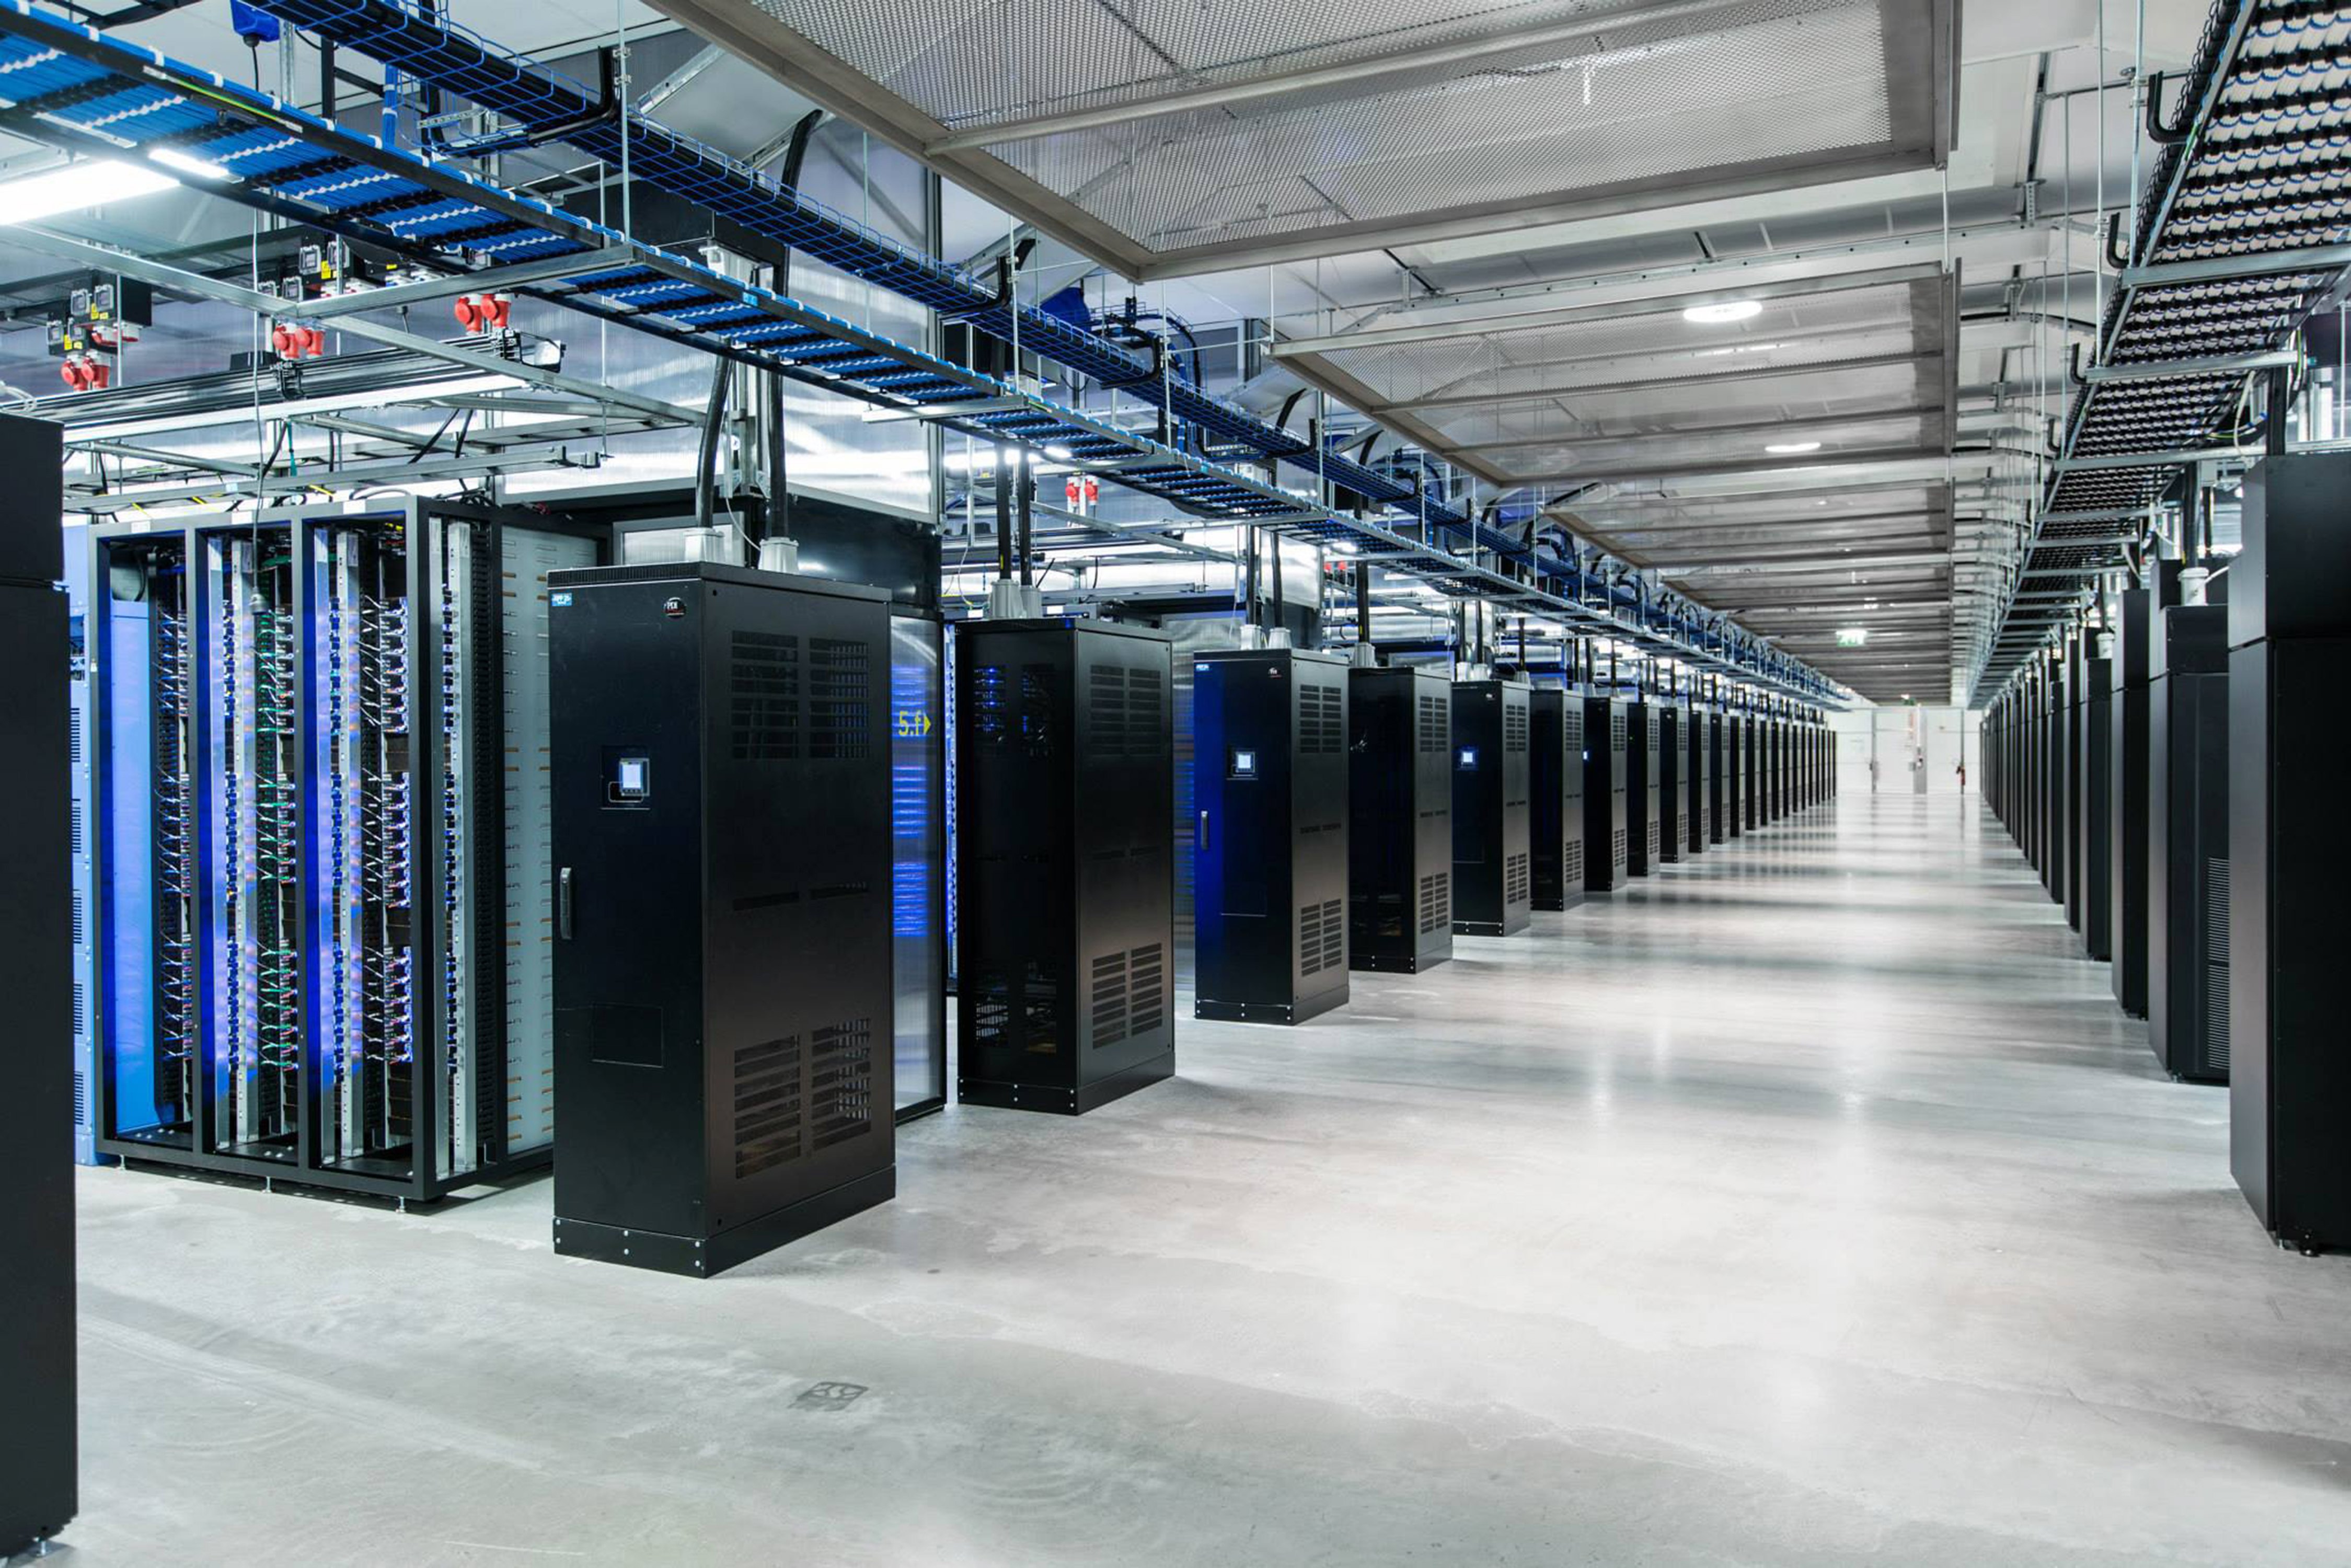 epa06616485 Undated handout image released by Facebook showing the interior of their data center campus in Lulea, Sweden, 20 March 2018. A growing controversy in both the Great Britain and the US has raised questions about how Cambridge Analytica, a firm hired by US President Trump's 2016 election campaign, was able to gain access to private information on over more than 50 million Facebook users.  EPA/FACEBOOK / HANDOUT EDITORIAL USE ONLY, NO SALES, MAY ONLY BE USED WHEN FEATURING FACEBOOK OR TO ILLUSTRATE AN ARTICLE ABOUT FACEBOOK HANDOUT EDITORIAL USE ONLY/NO SALES